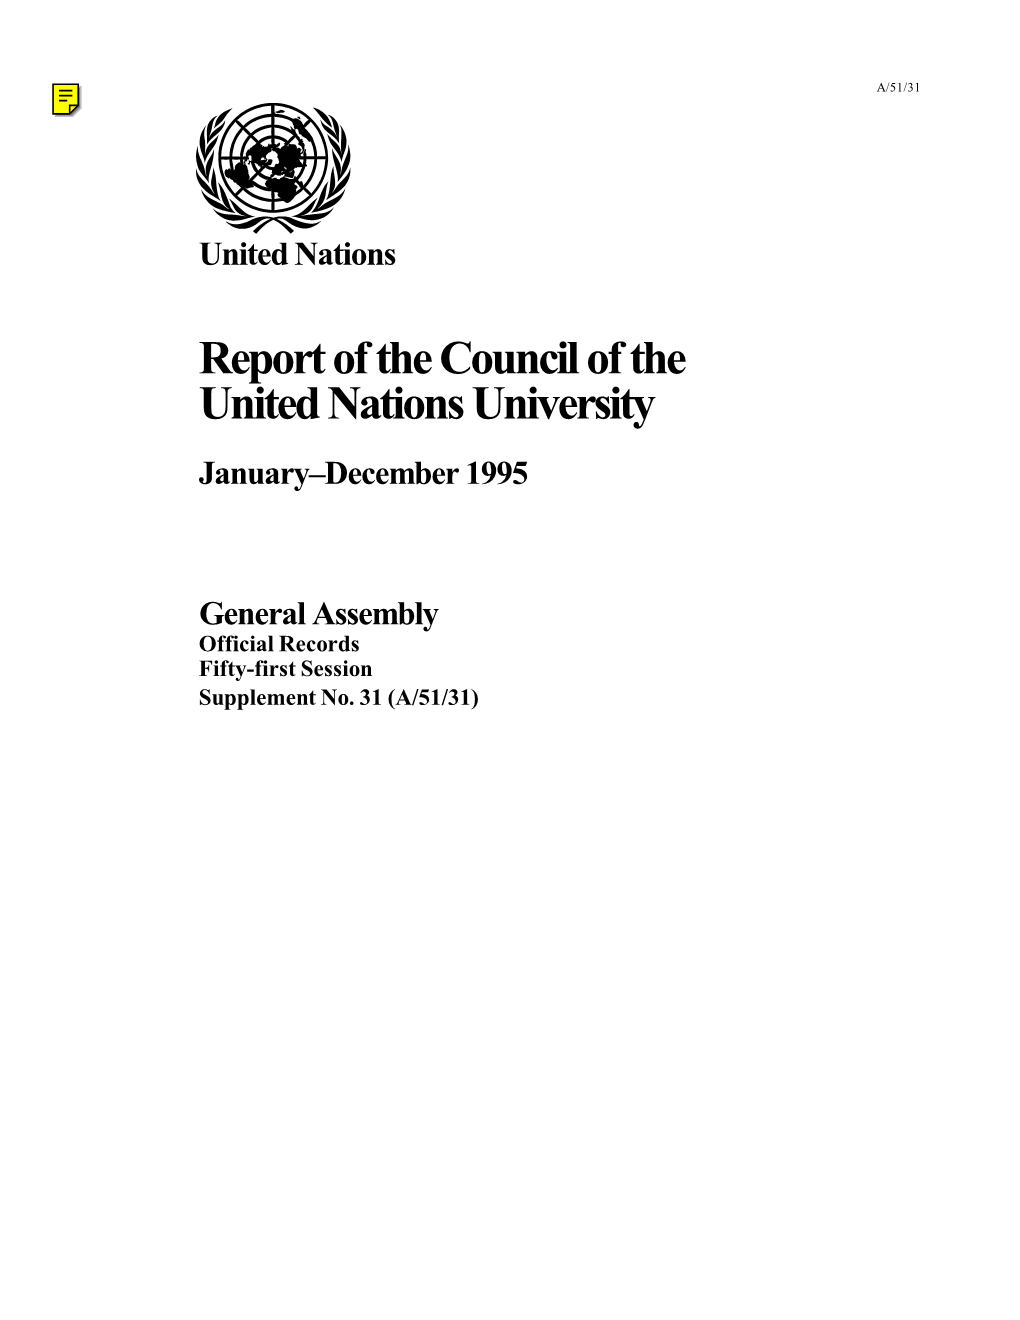 Report of the Council of the United Nations University January–December 1995